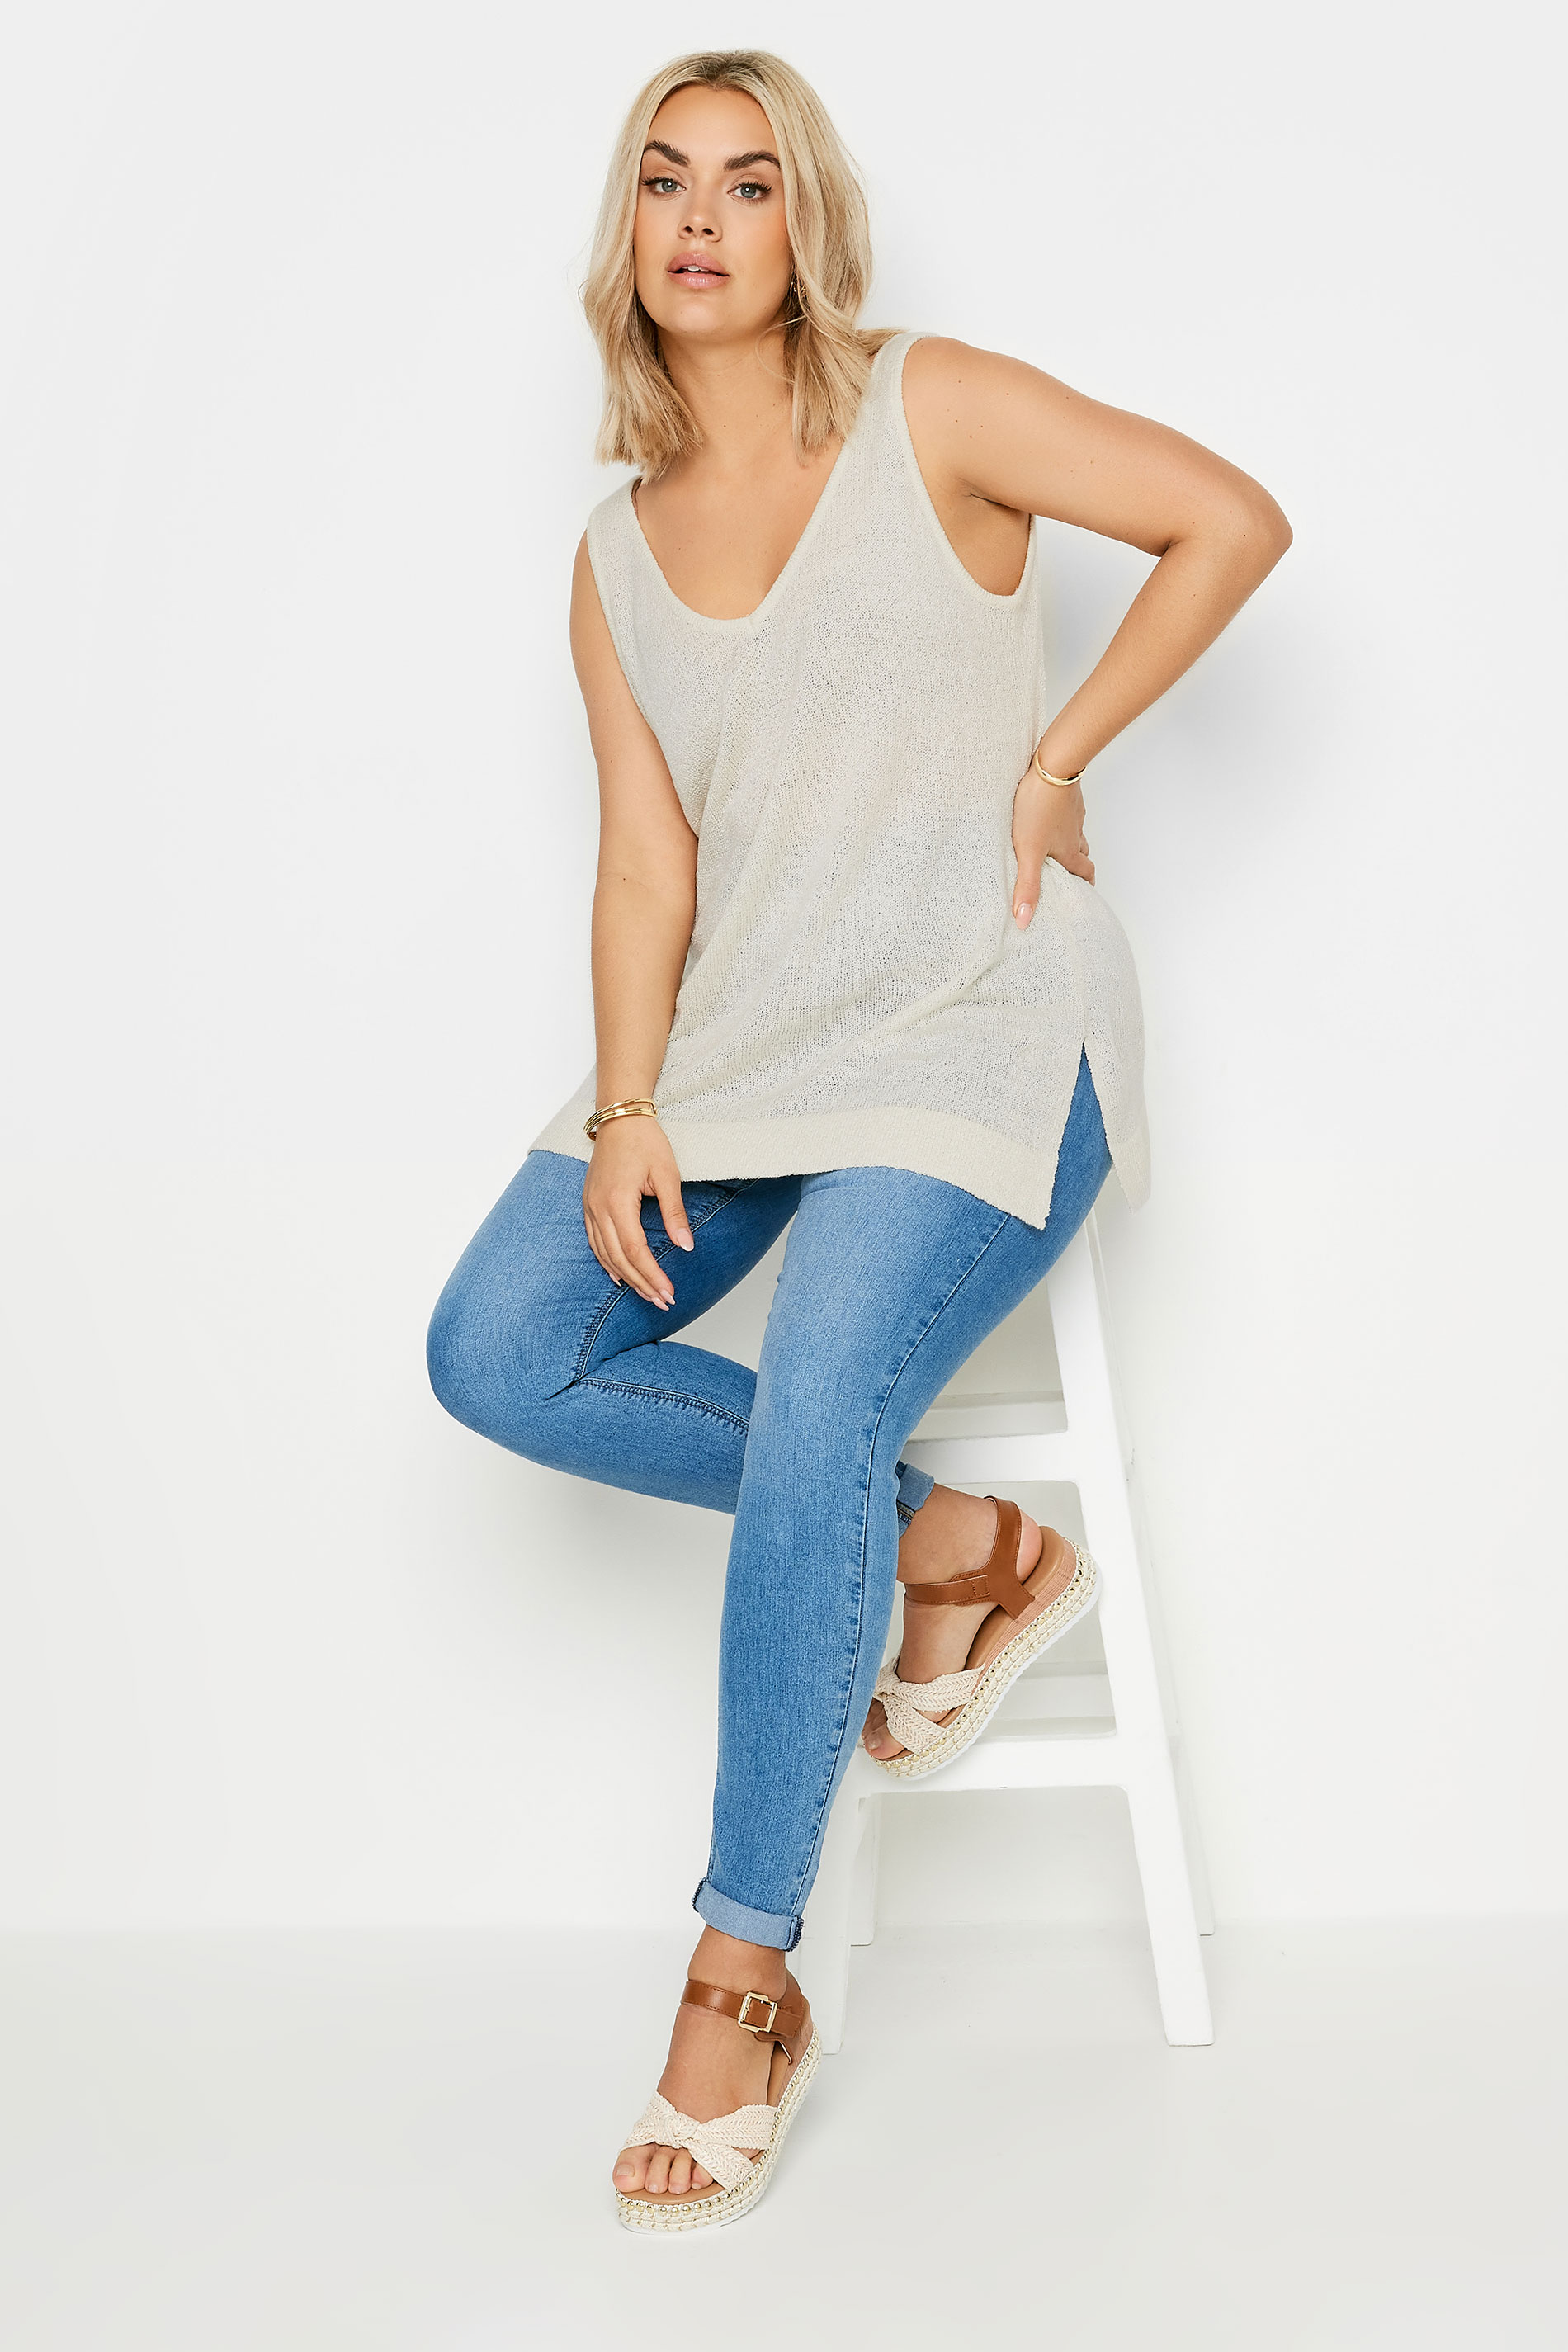 YOURS Plus Size White Knitted Vest Top | Yours Clothing 2